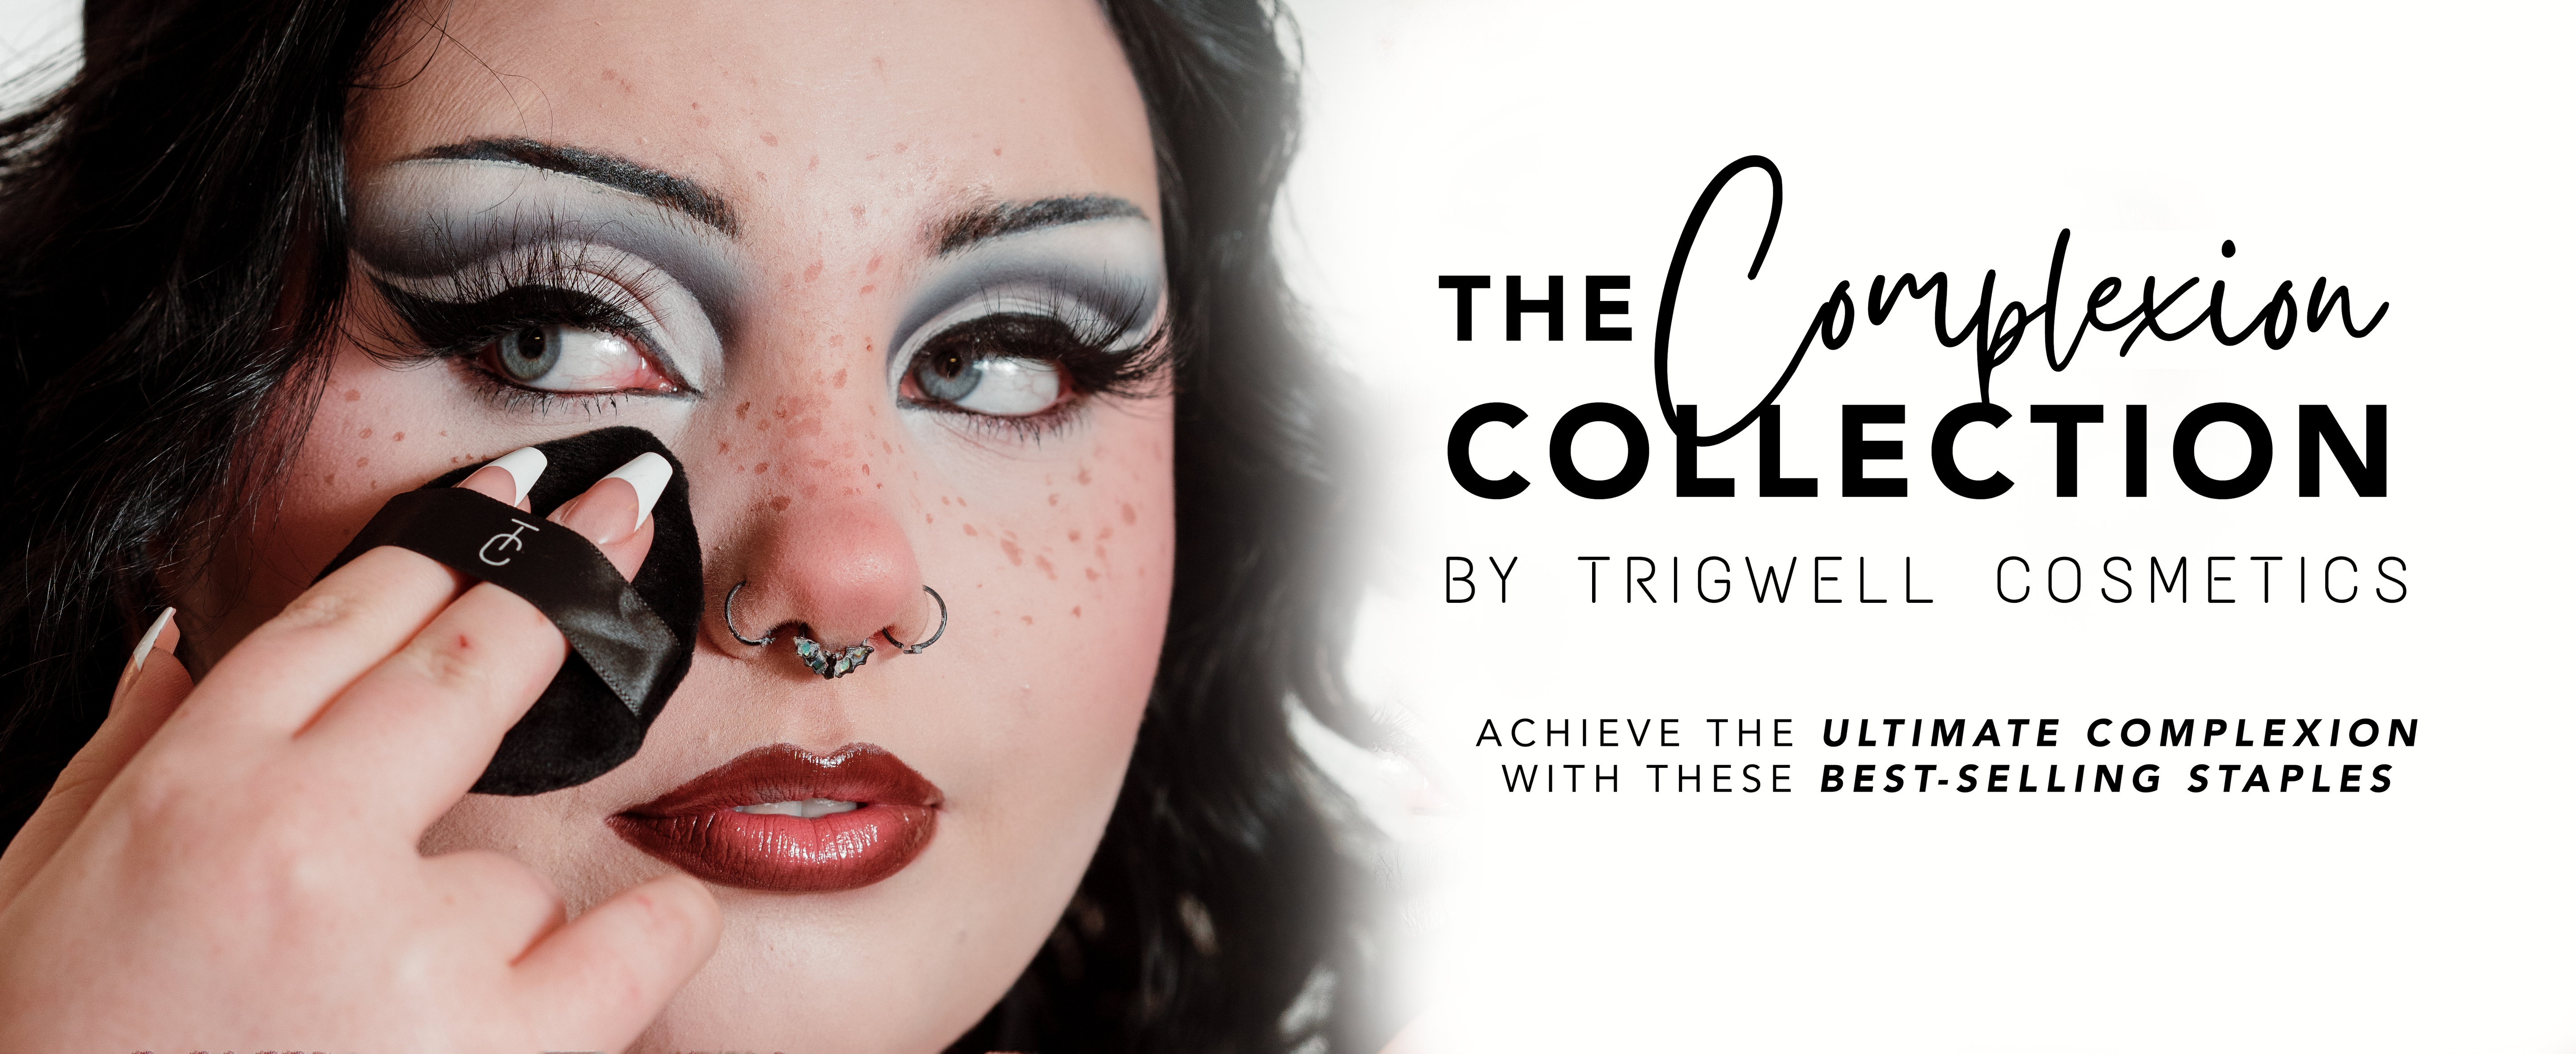 The Complexion Collection